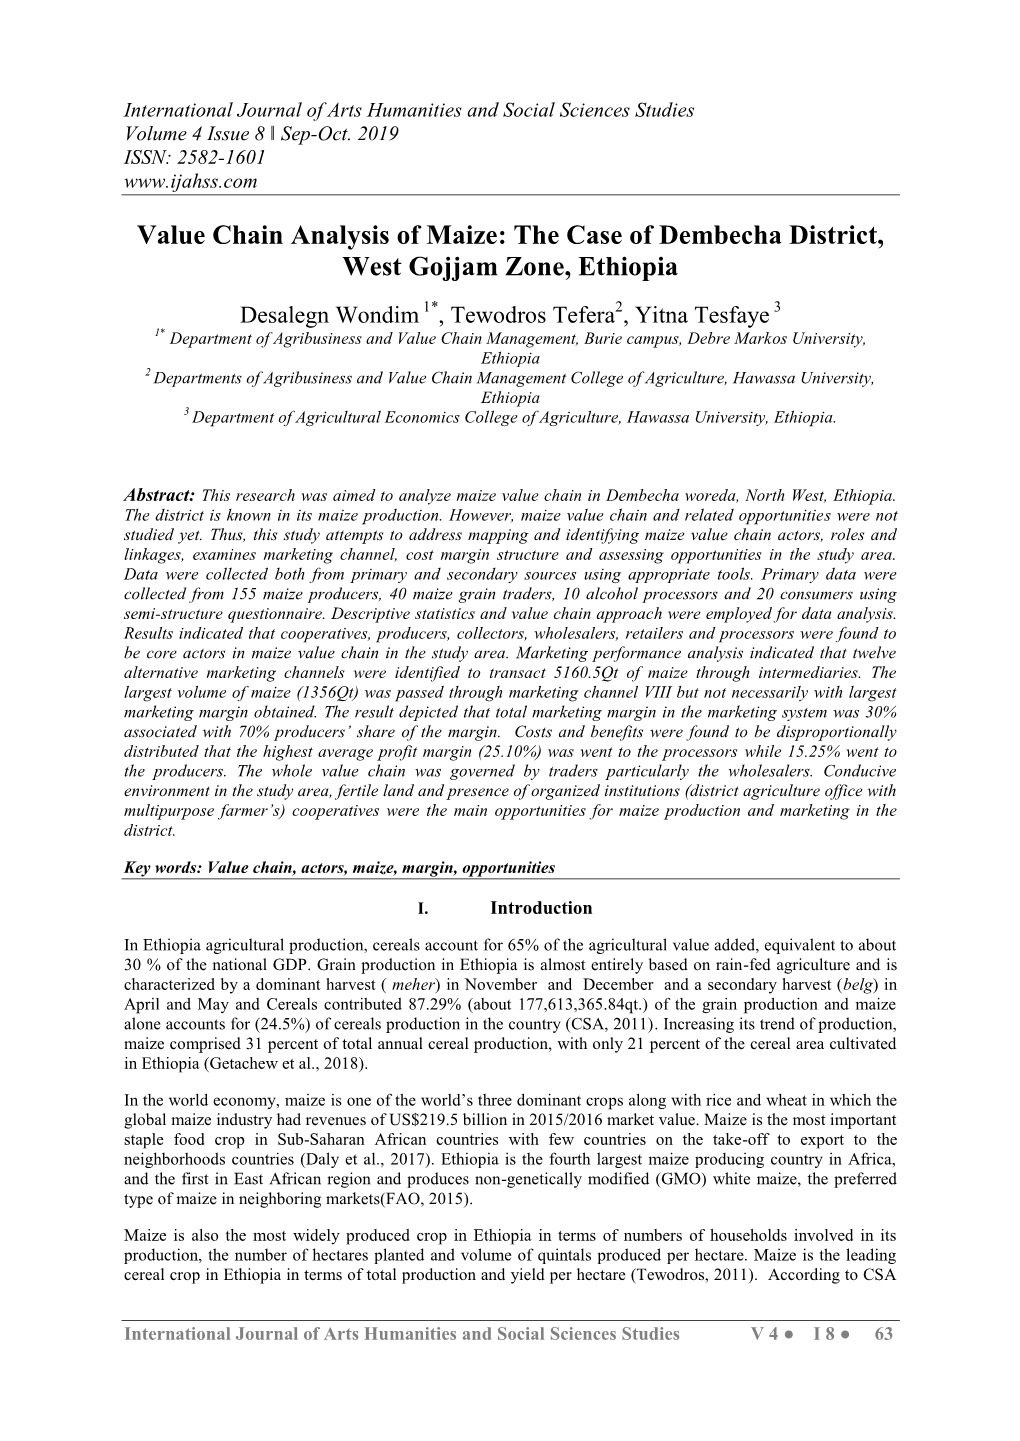 Value Chain Analysis of Maize: the Case of Dembecha District, West Gojjam Zone, Ethiopia